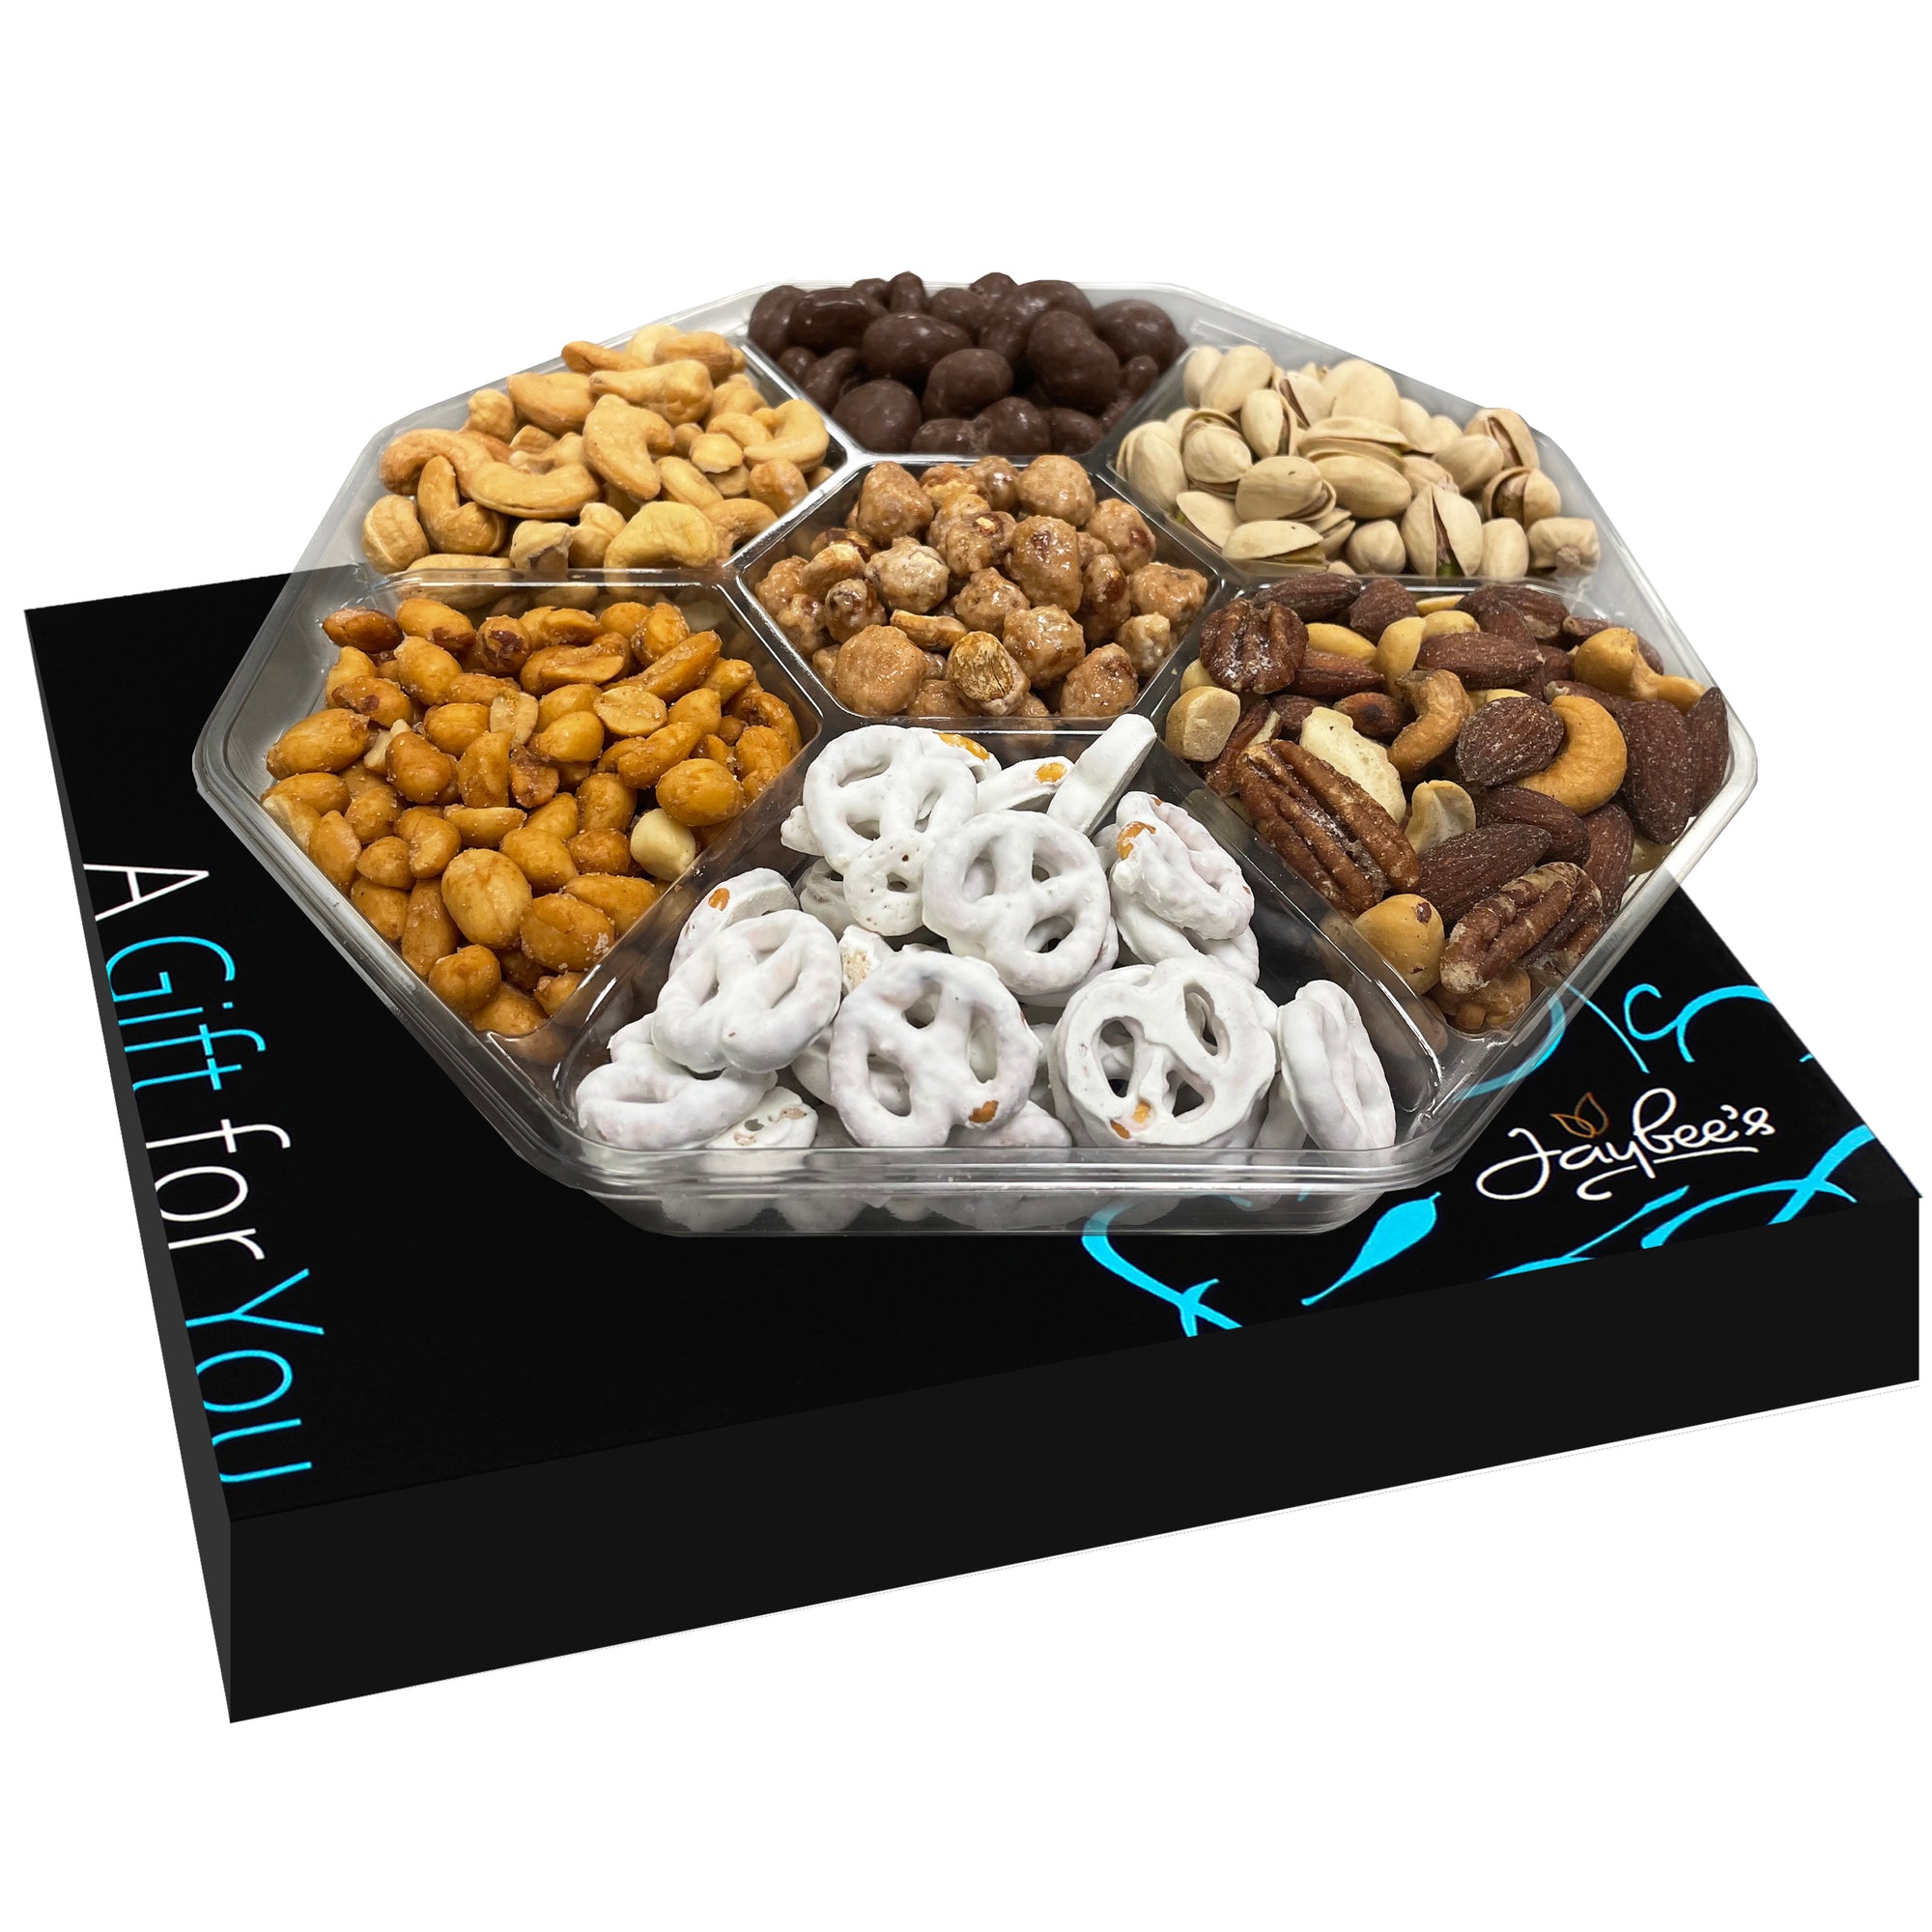 7 Sections - Nuts Gift Basket with Chocolate